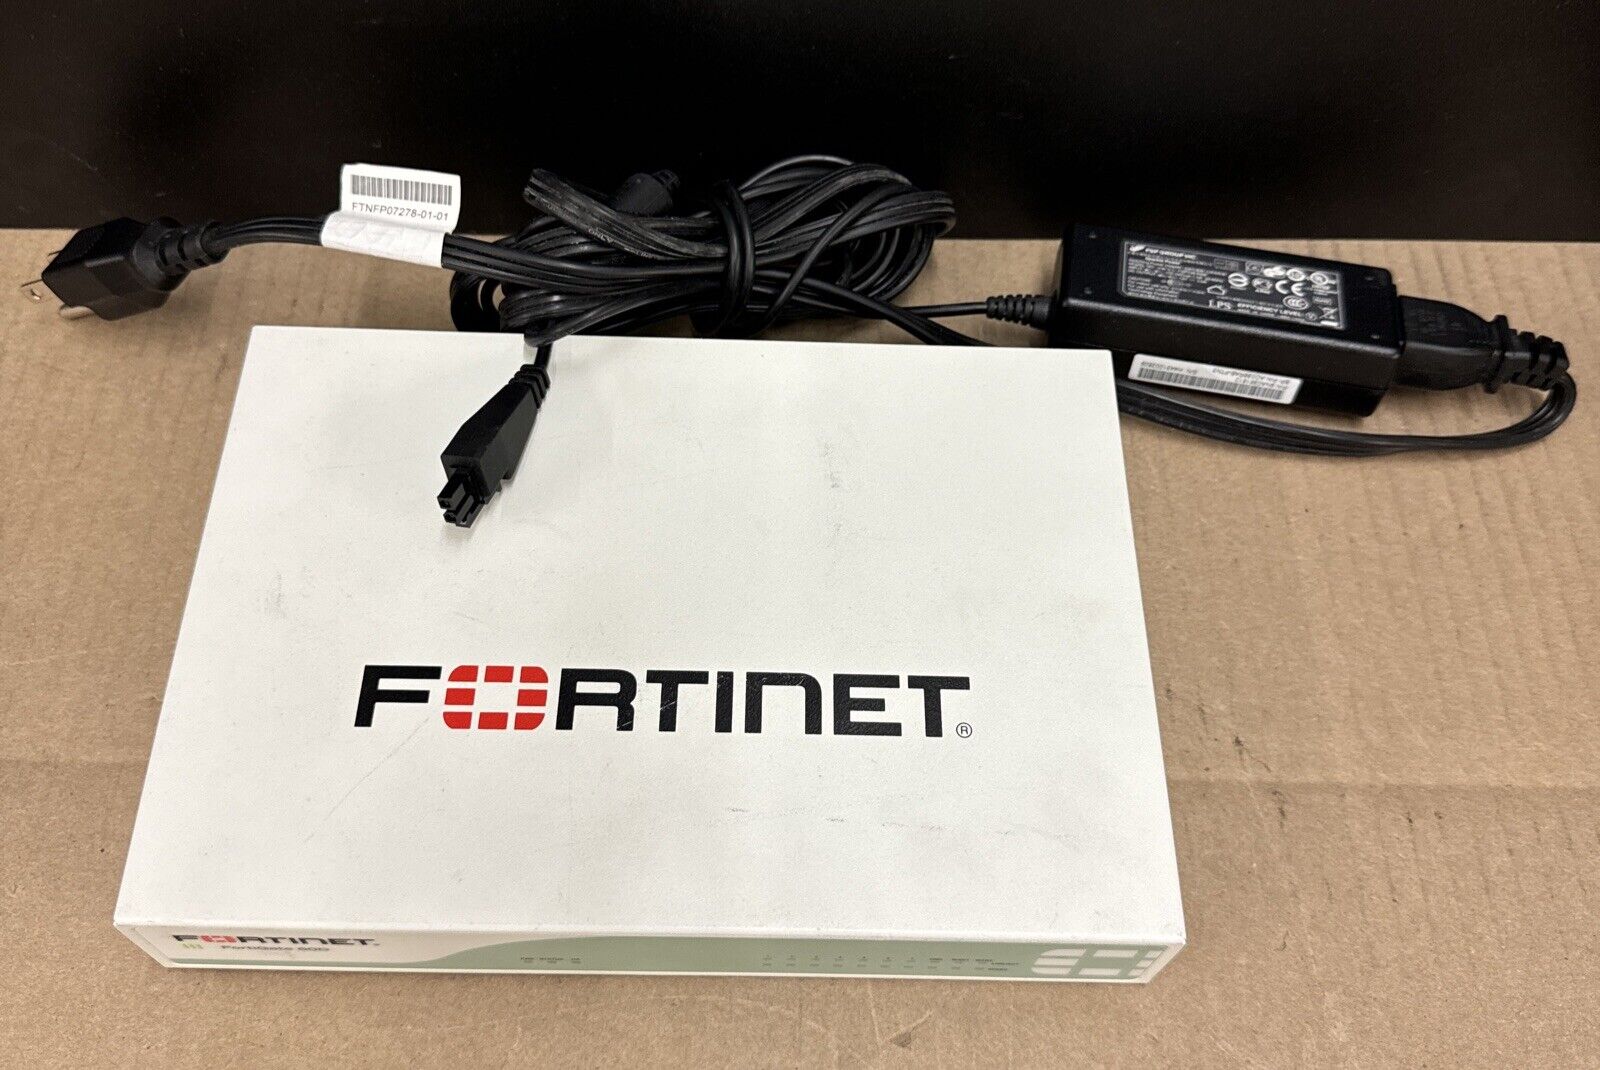 Fortinet FortiGate 60D Network Security Firewall Router Appliance FG-60D